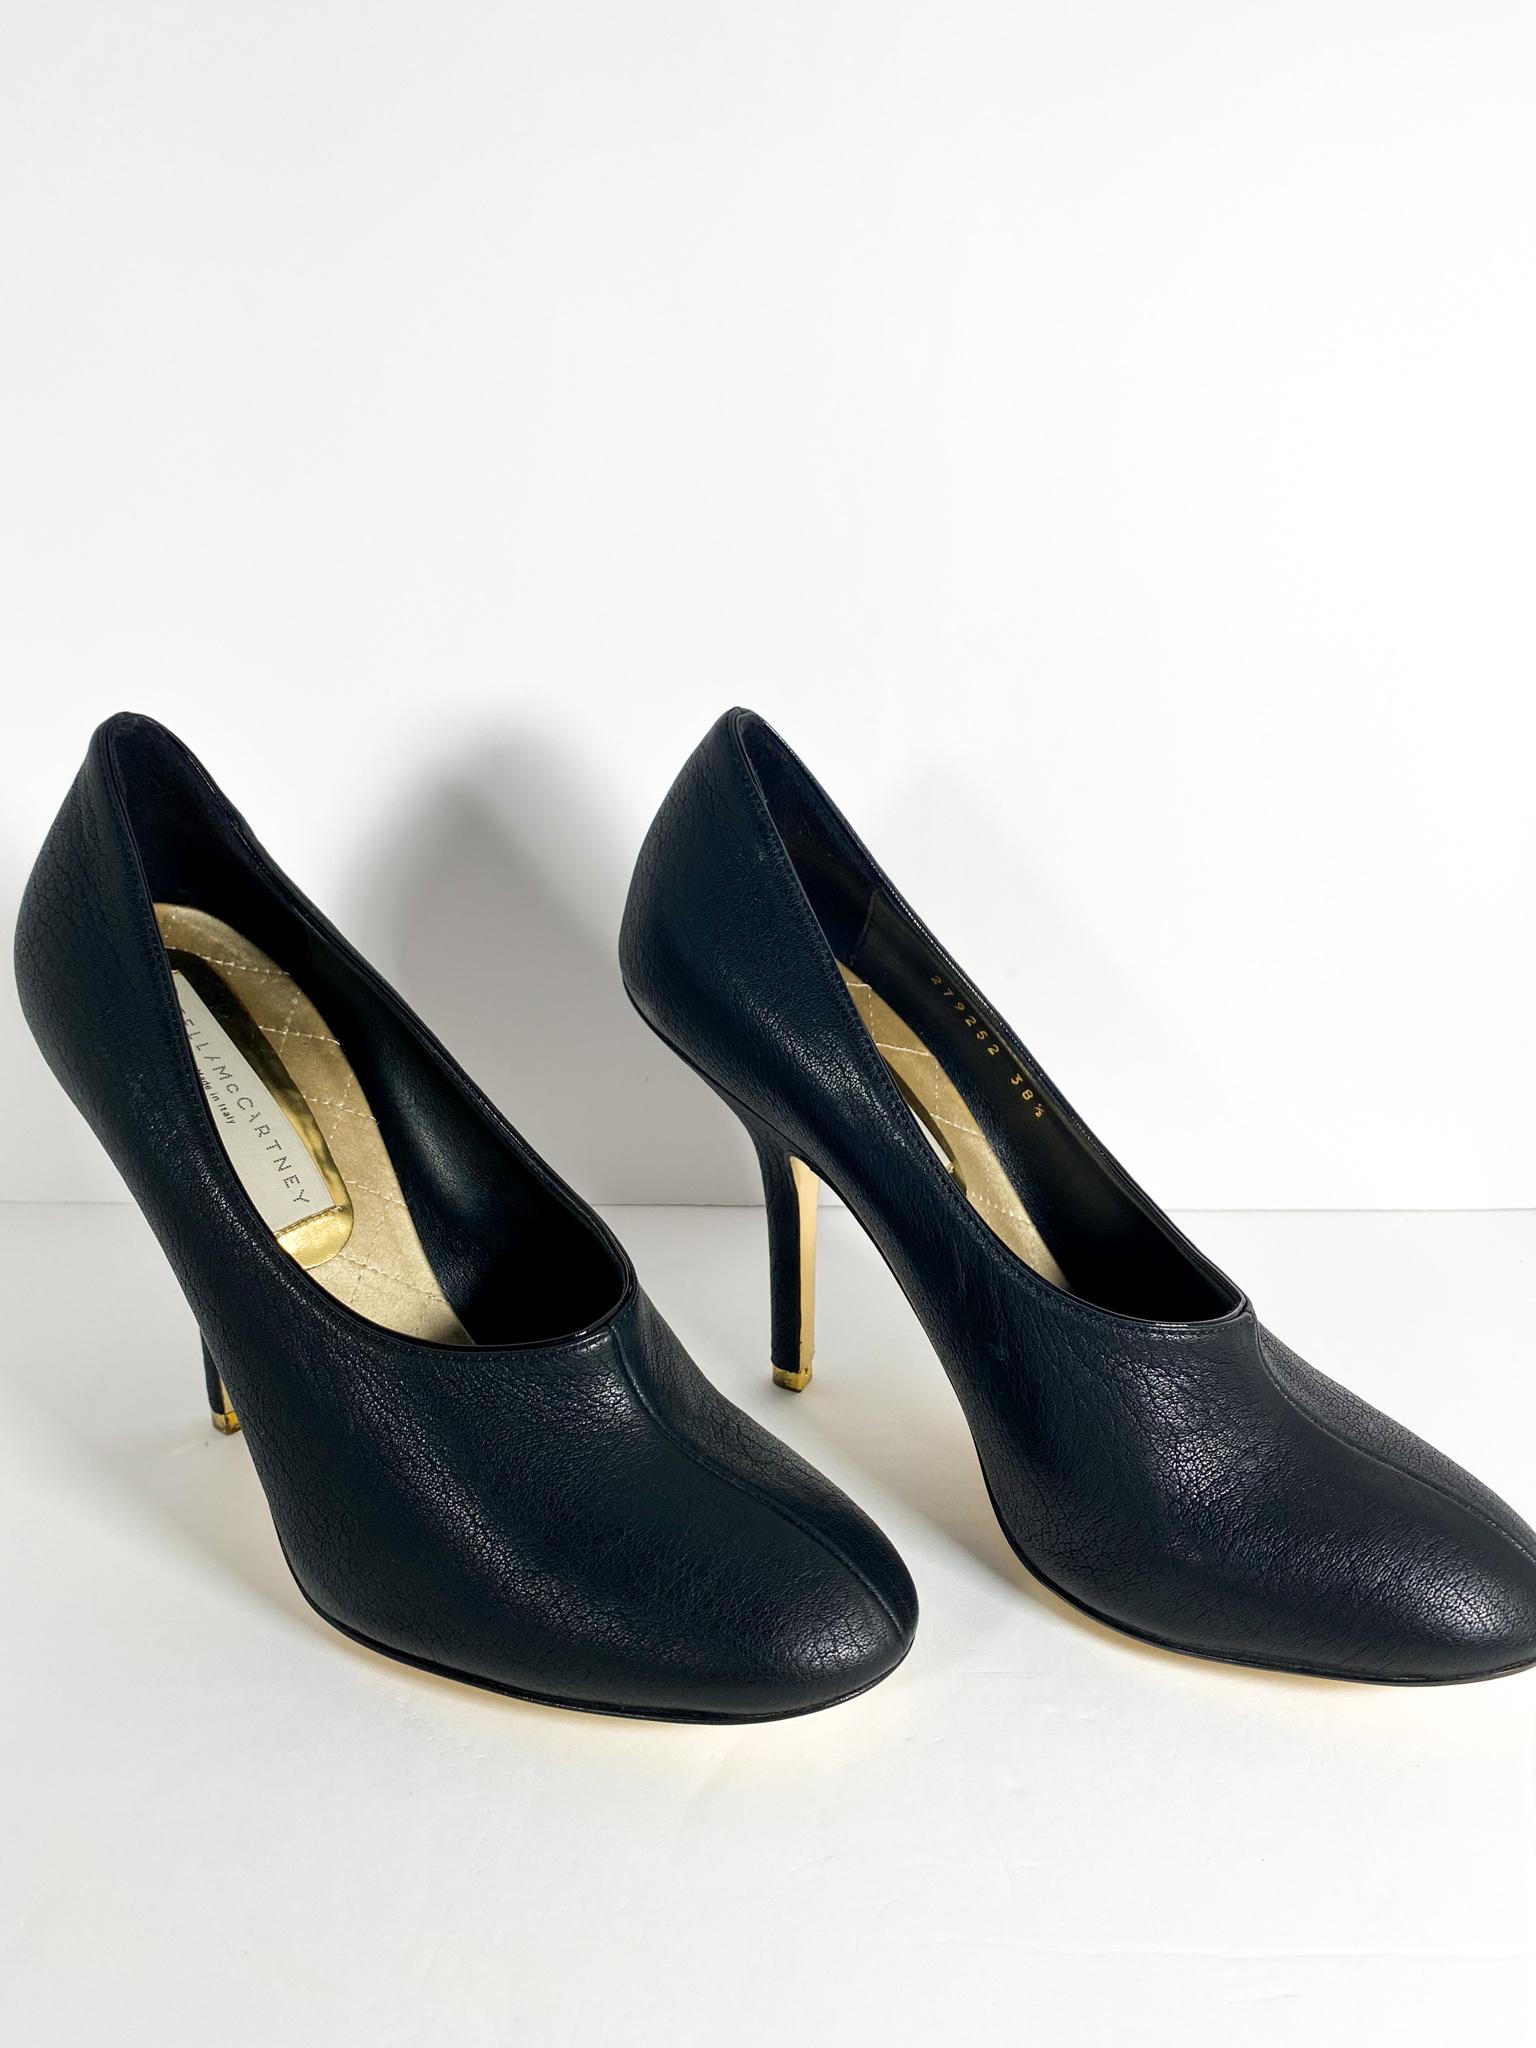 Beautifully and functionally designed faux leather three inch heels, includes extra heel tips.

Condition: Great condition, hardly worn.
Exterior: Slight discoloration on heel tips. 
Interior: Clean 
Made In: Italy
Serial Number: